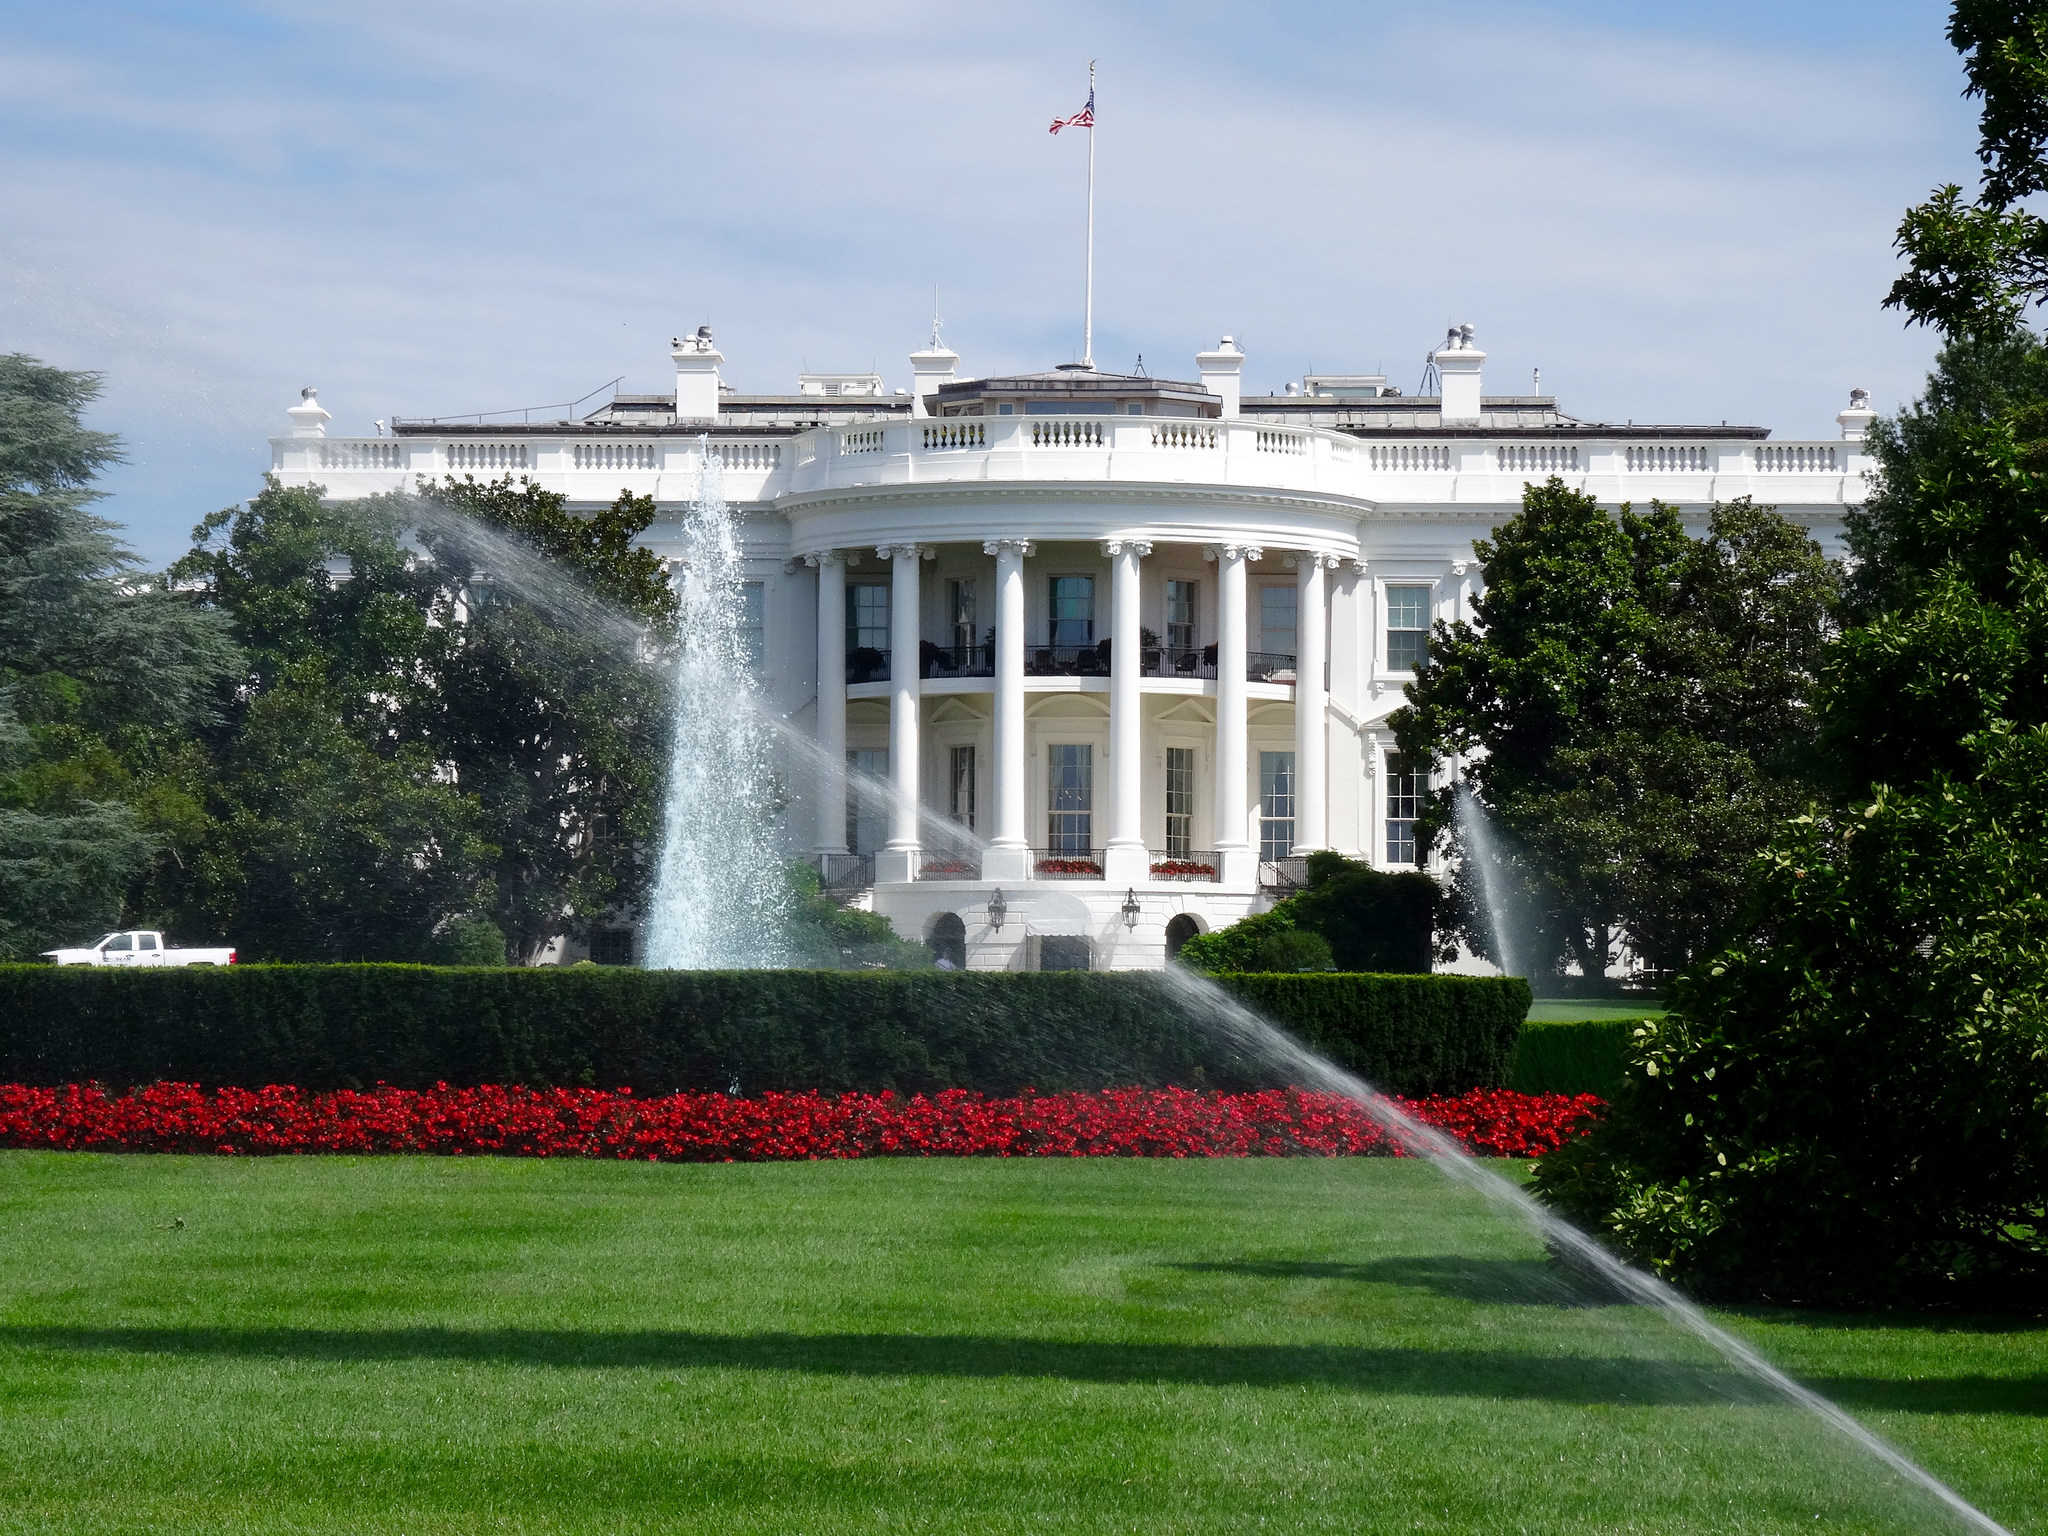 Should Apple take over the White House?